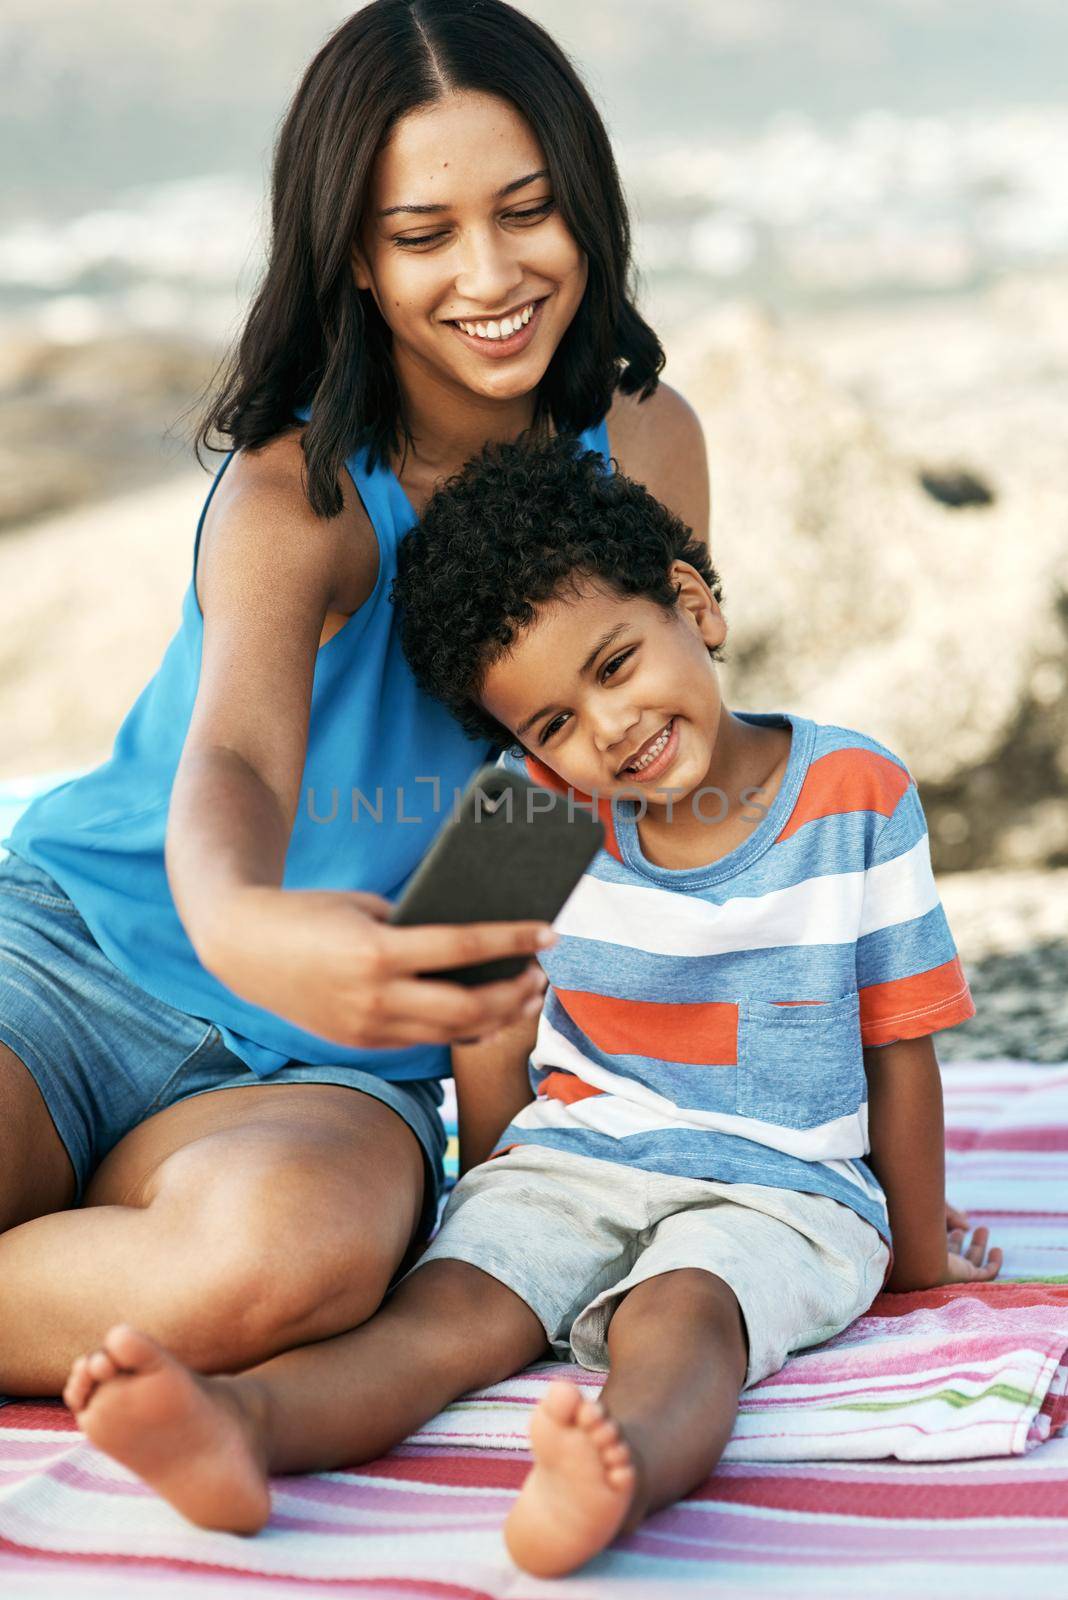 Shot of a mother and her son taking selfies at the beach.